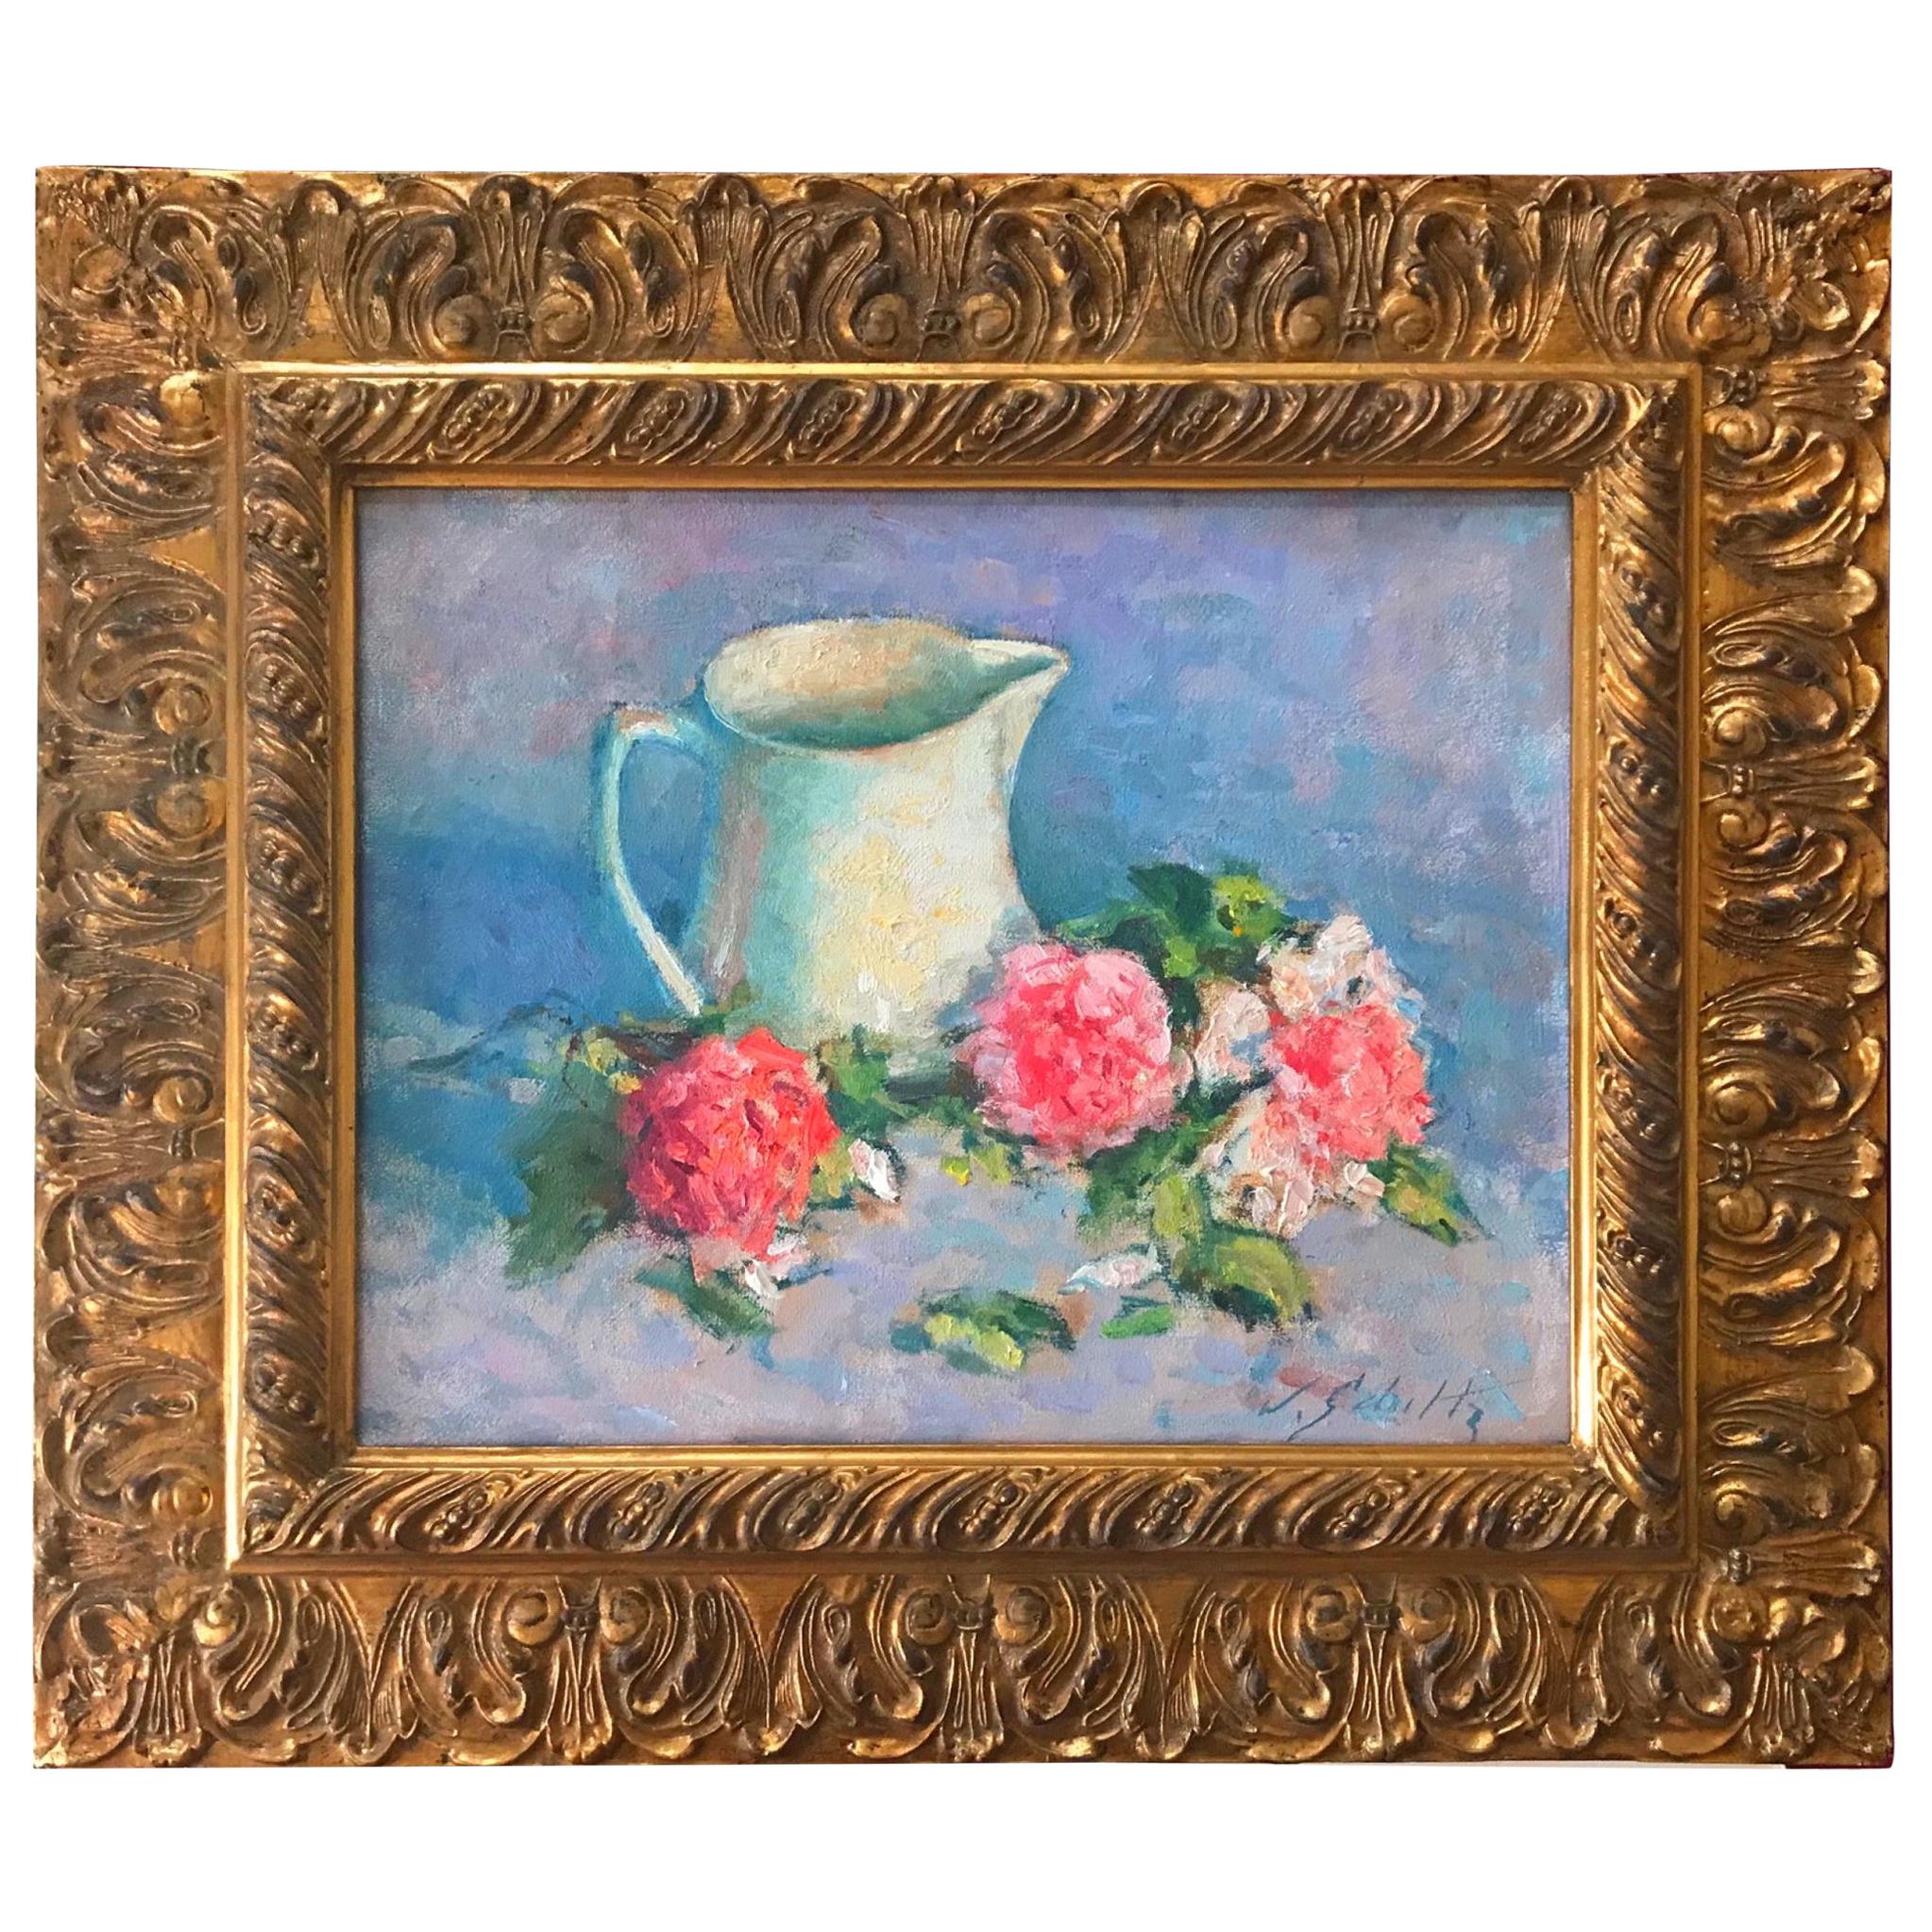 Late Impressionist Still Life Oil Painting, Pitcher with Peonies, Signed